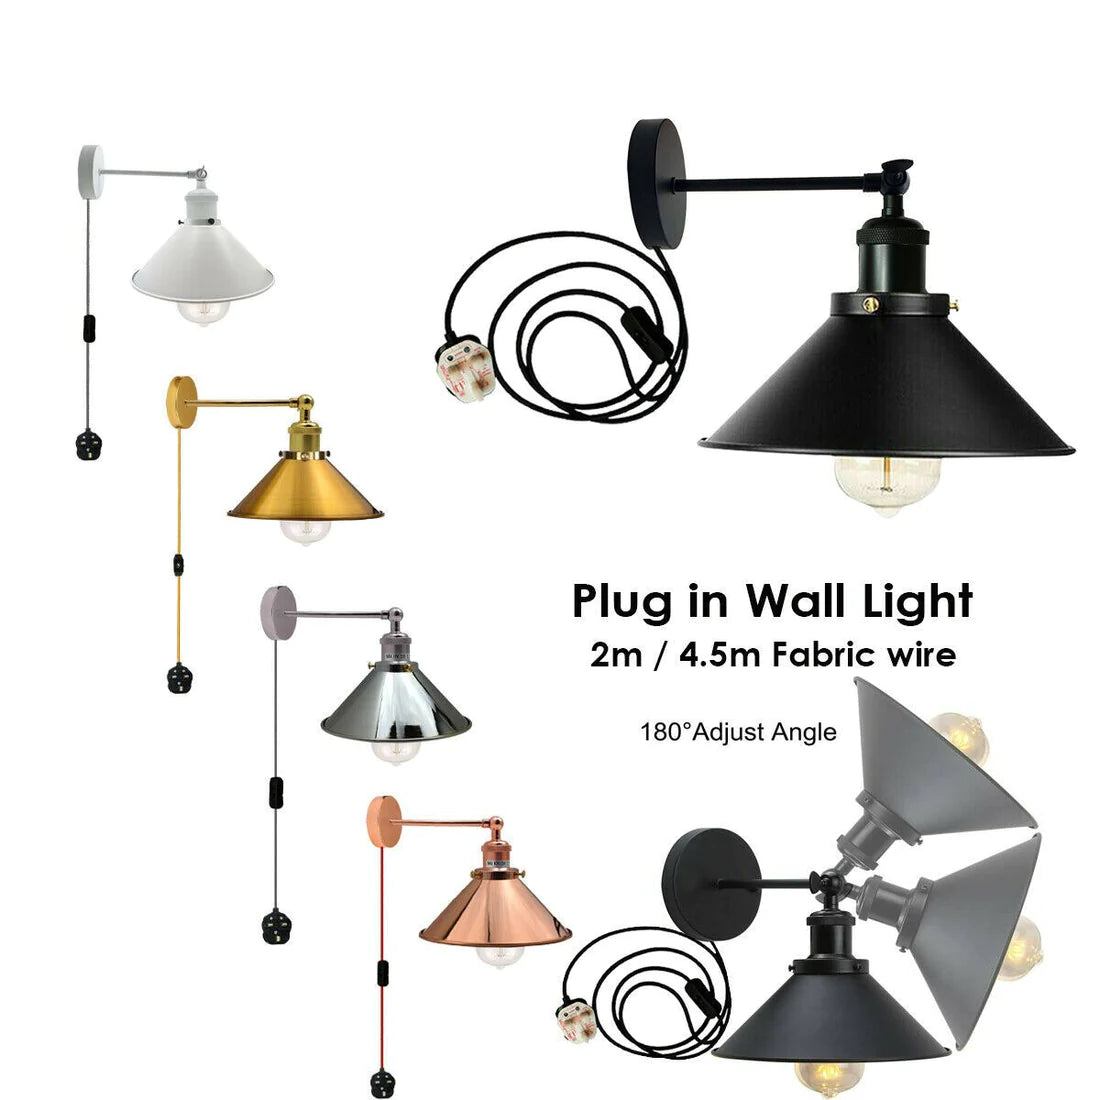 2M 4.5M fabric braided plug in wall light cable in various colour